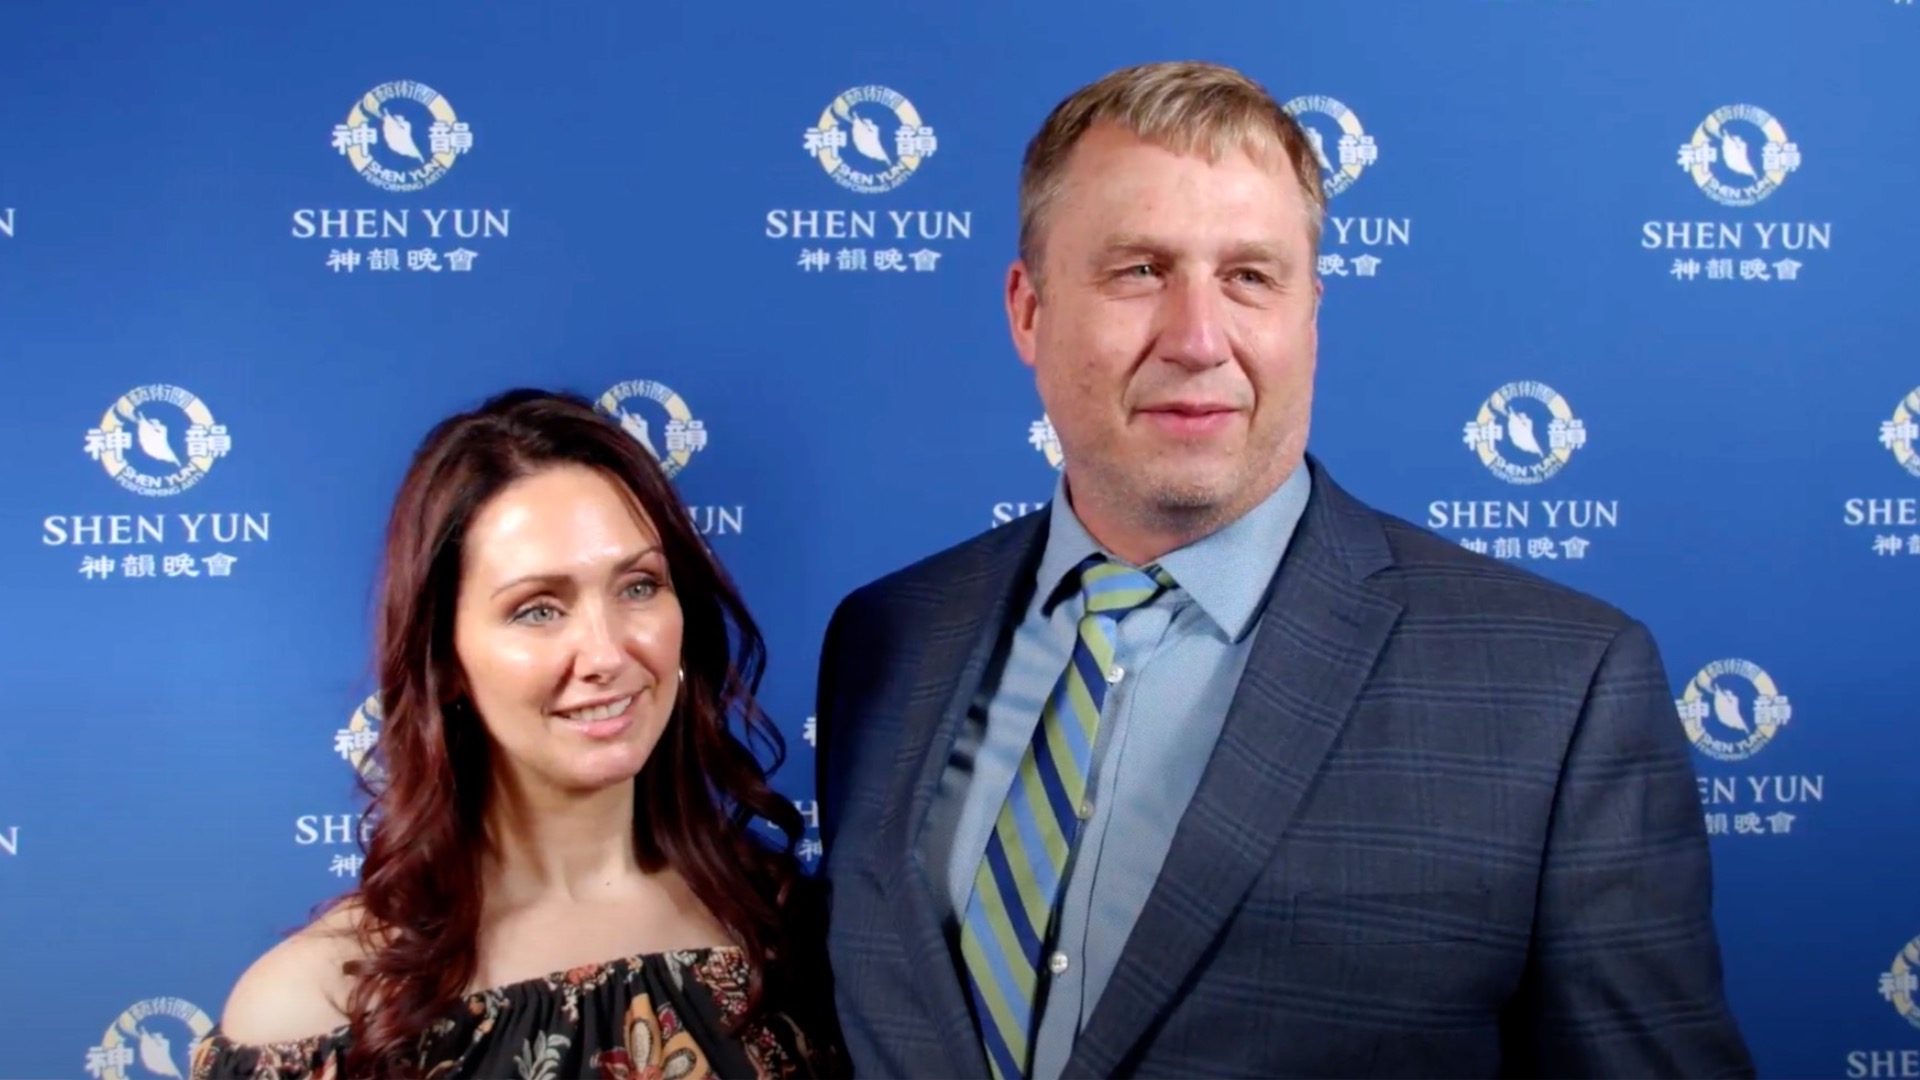 Theatergoers in Columbus, Ohio, Inspired by Shen Yun’s Message